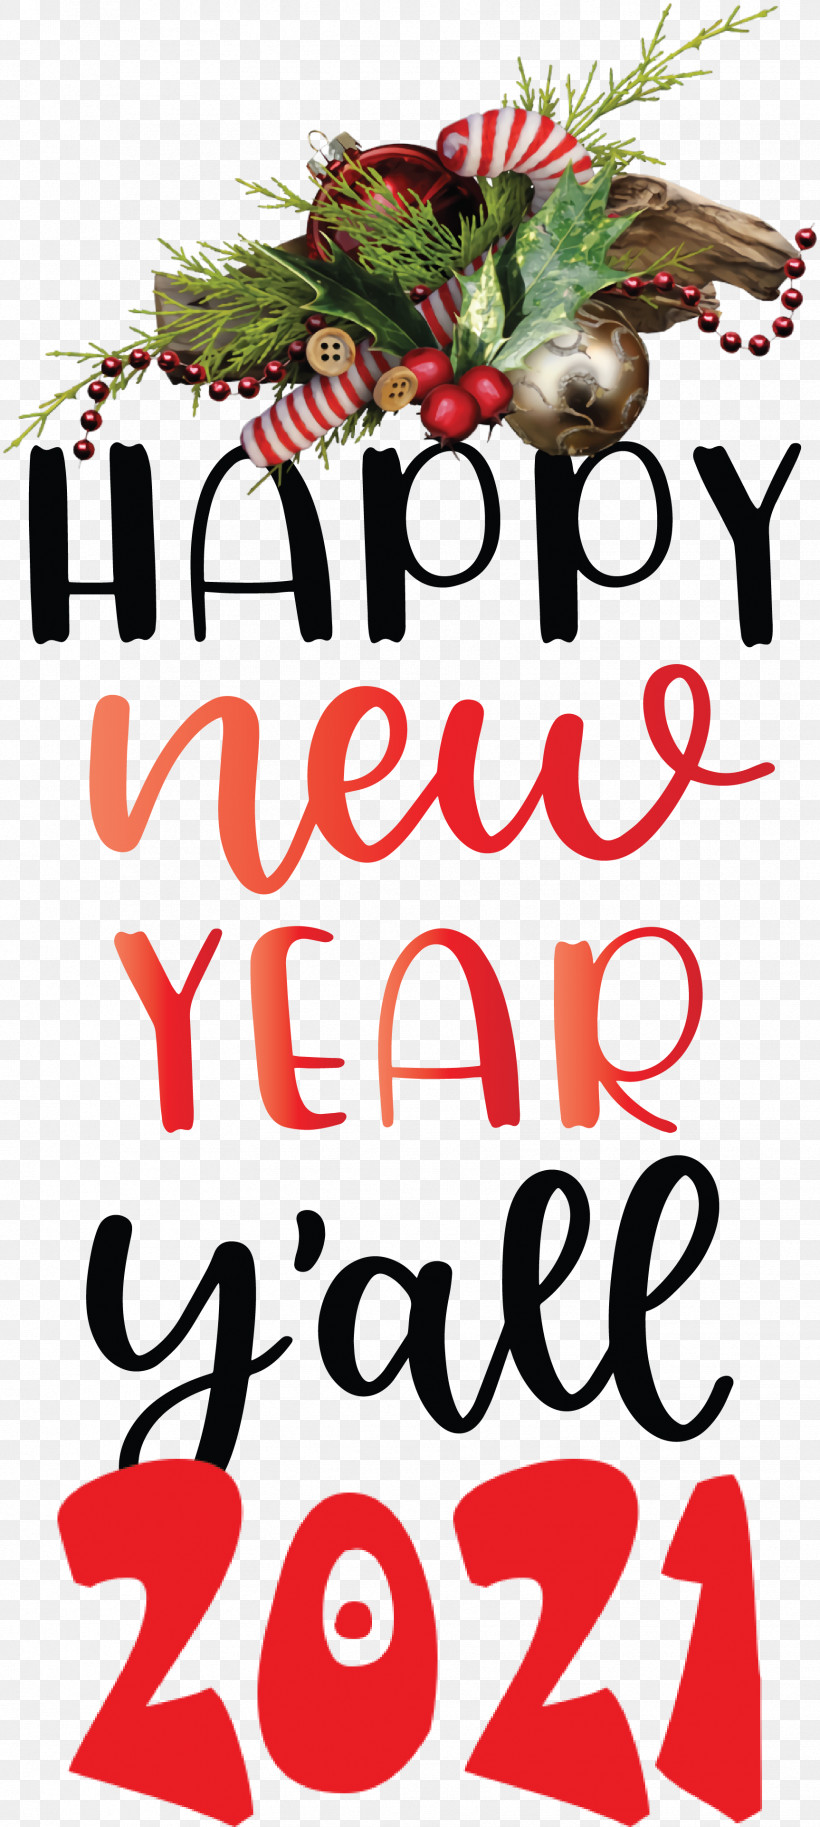 2021 Happy New Year 2021 New Year 2021 Wishes, PNG, 1726x3846px, 2021 Happy New Year, 2021 New Year, 2021 Wishes, Birthday, New Year Download Free